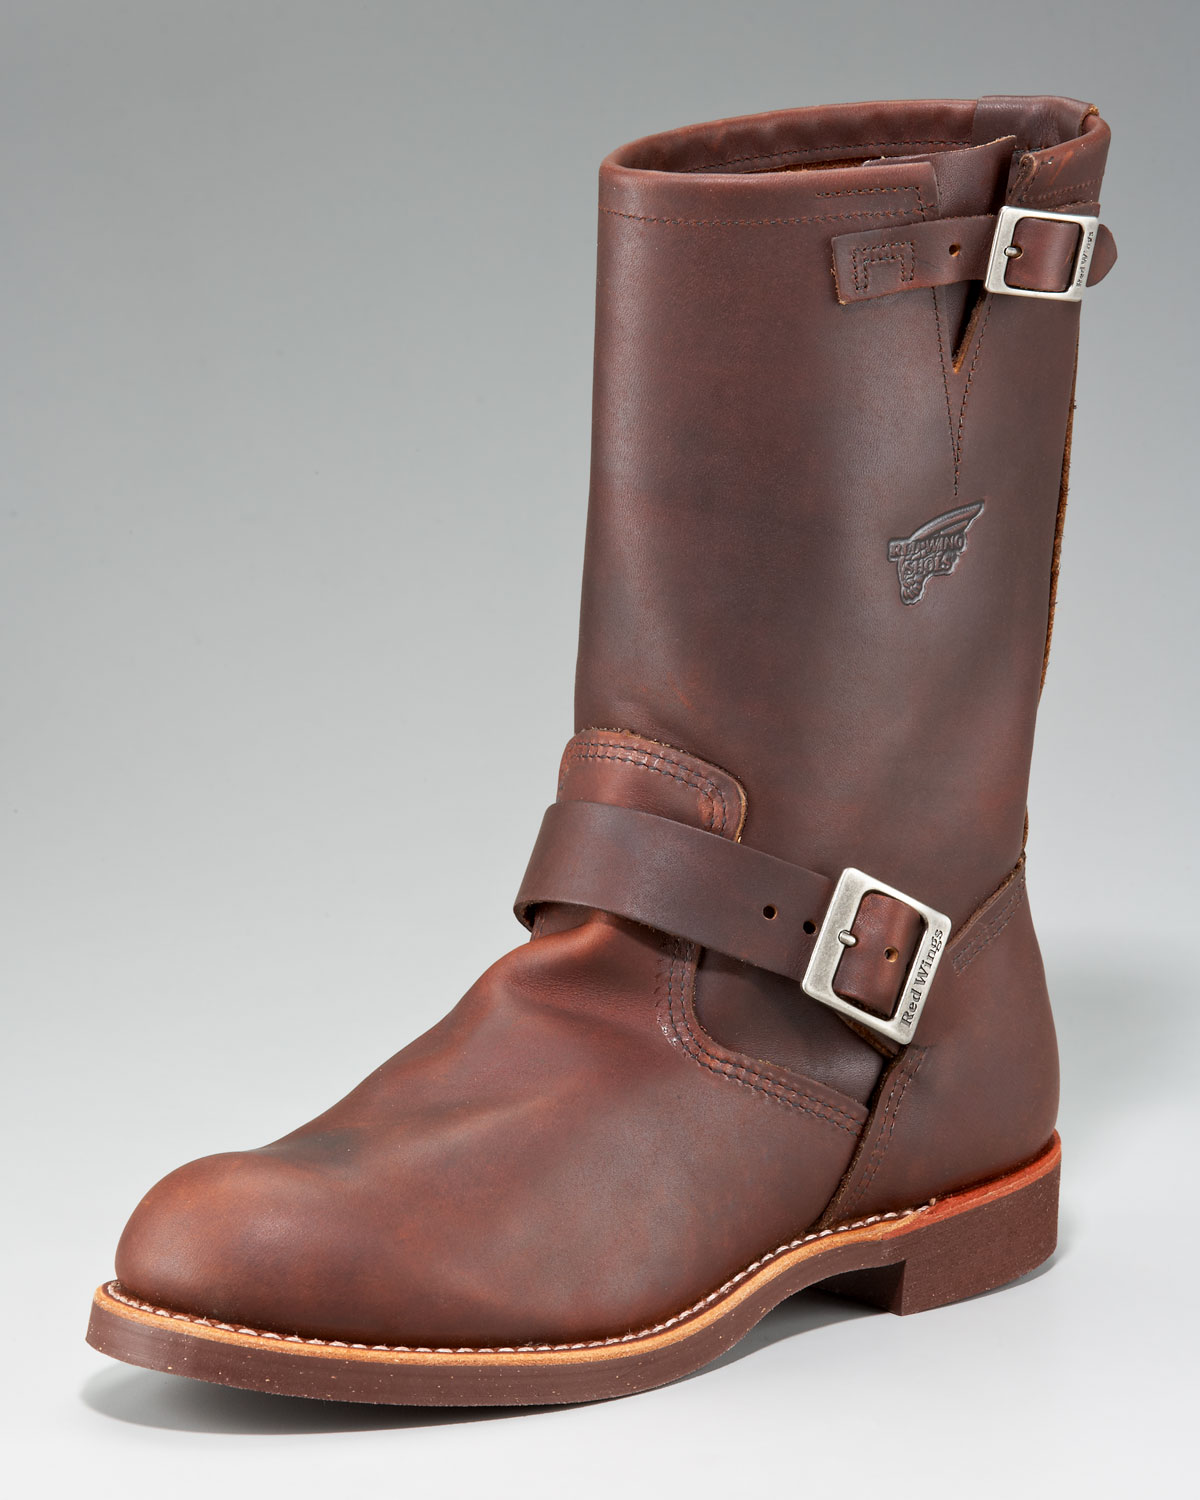 Lyst - Red Wing Heritage Engineer Boot in Brown for Men